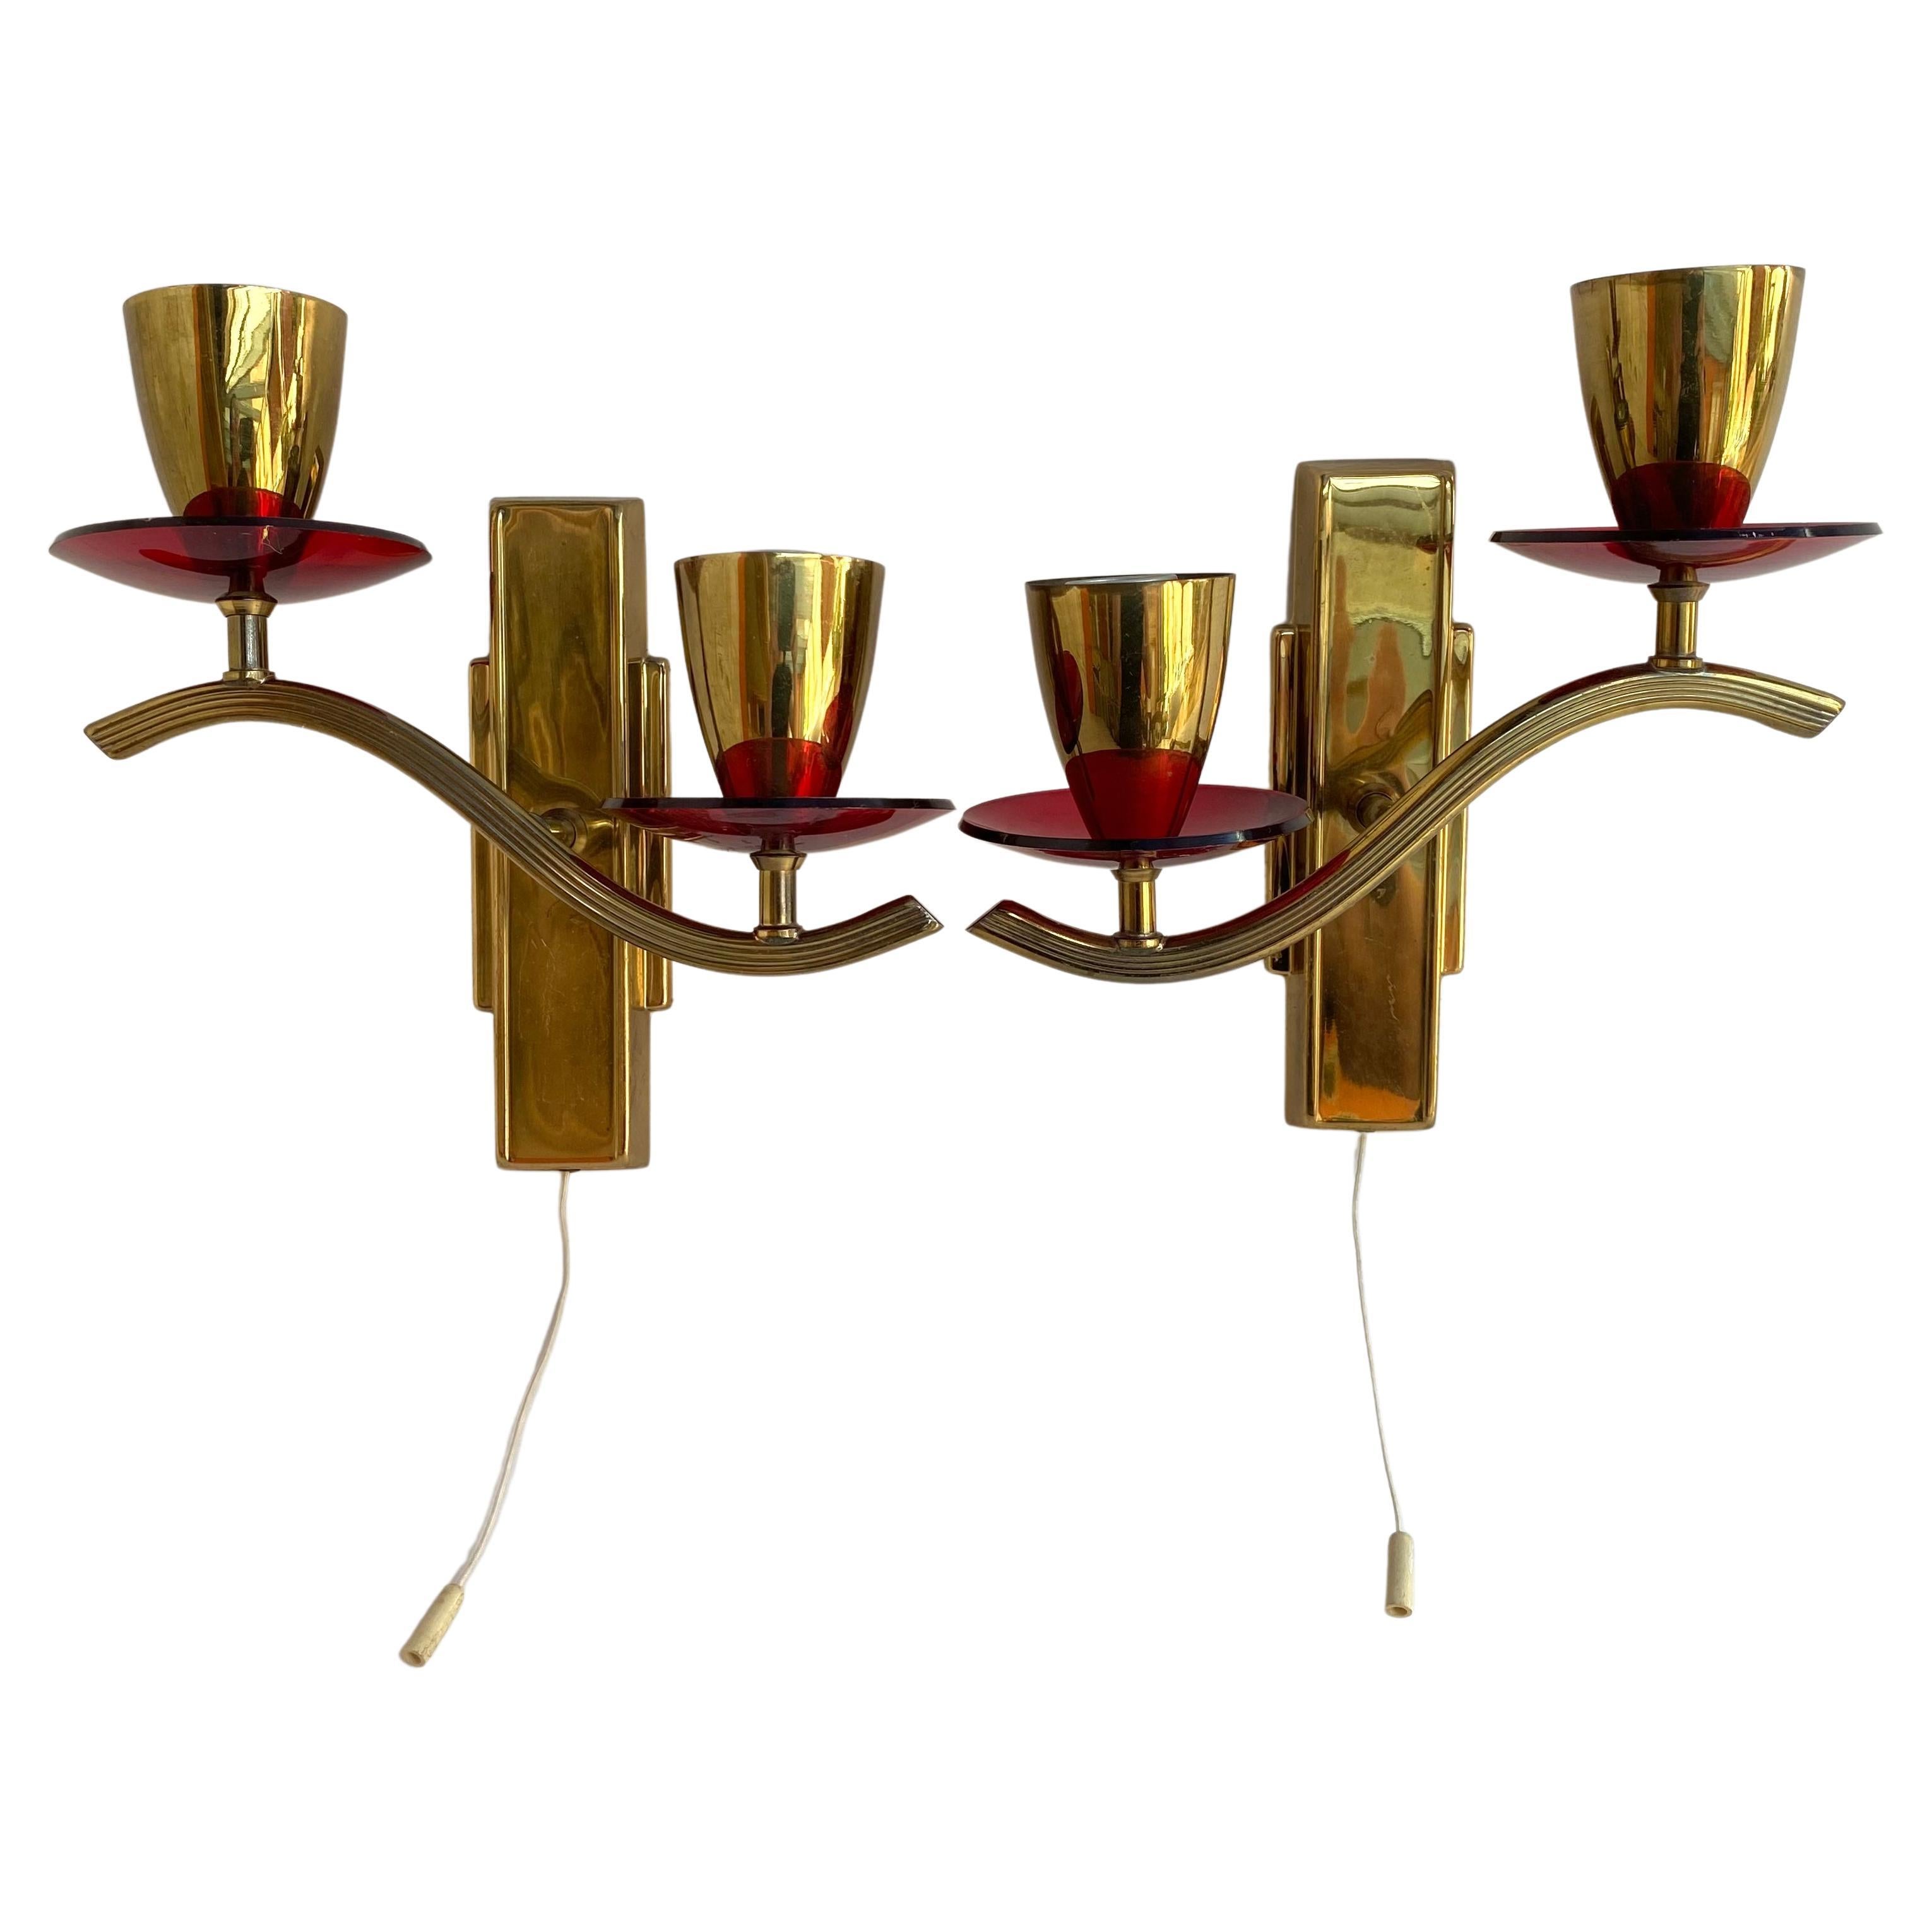 Vintage Wall Sconces in Gilt Brass with Plexiglass Elements, Set 2, Germany